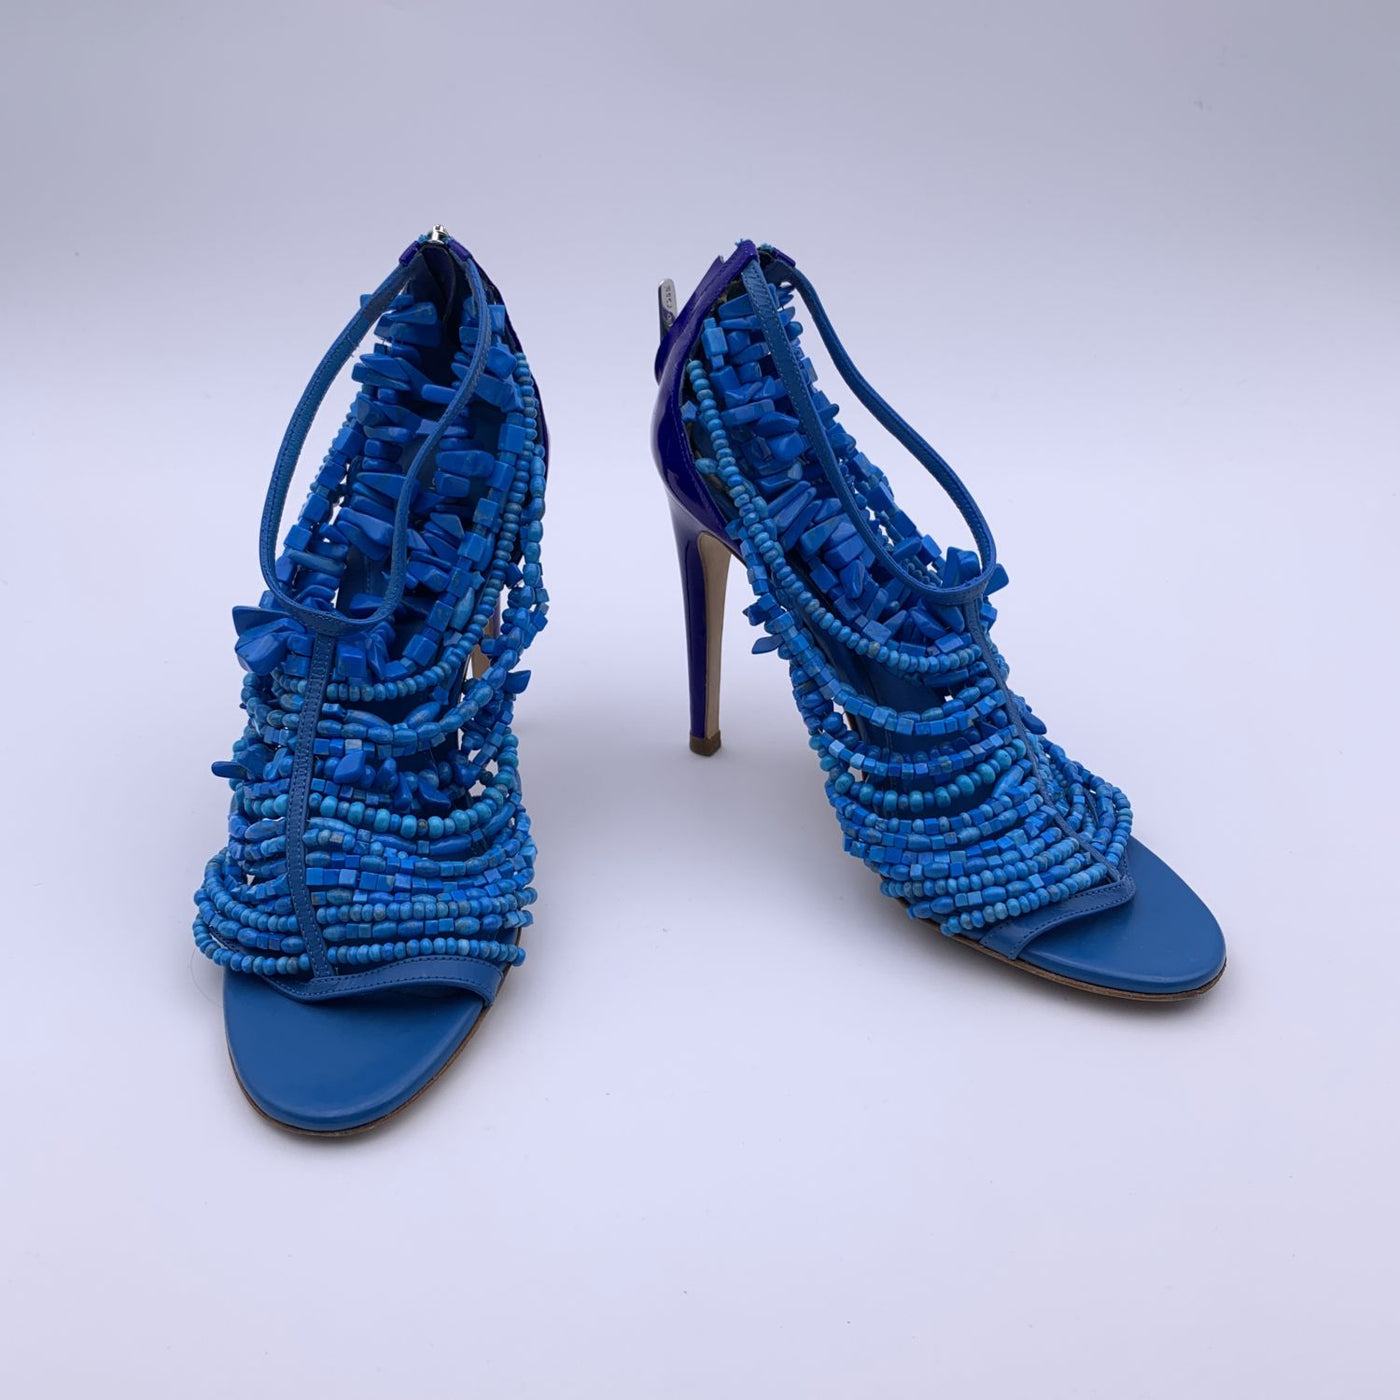 Sergio Rossi Blue Leather and Beads Cage Heeled Sandals Size 36